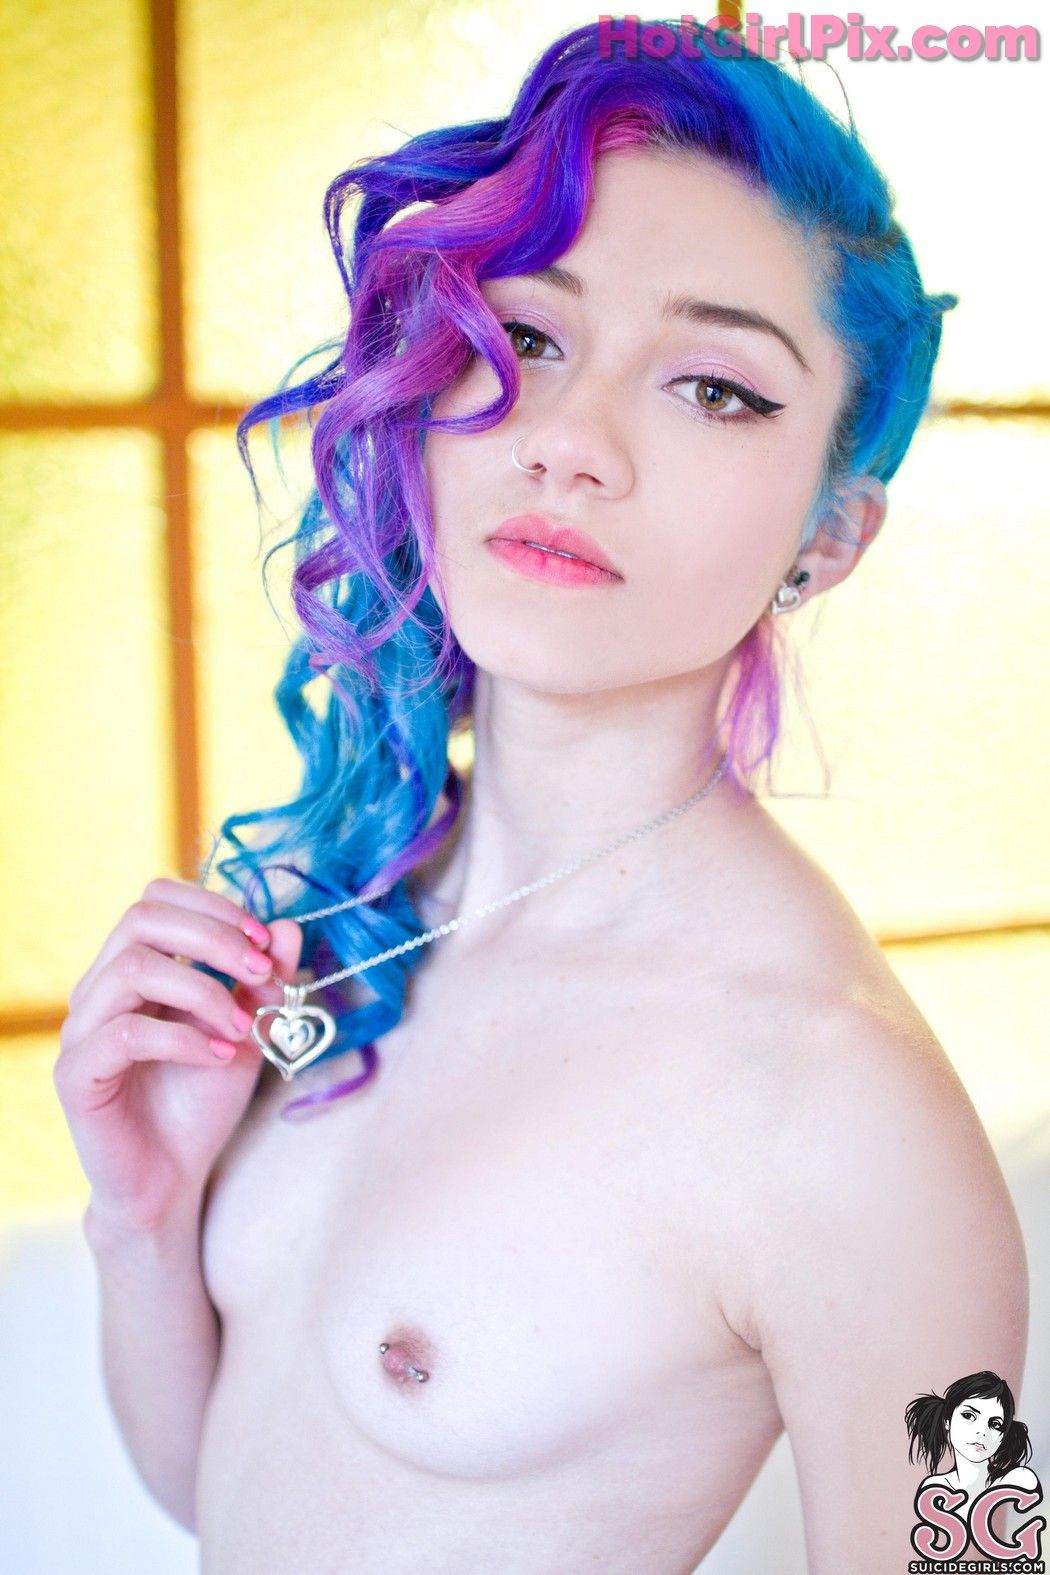 [Suicide Girls] Fay - Love Me Like You'll Never See Me Again